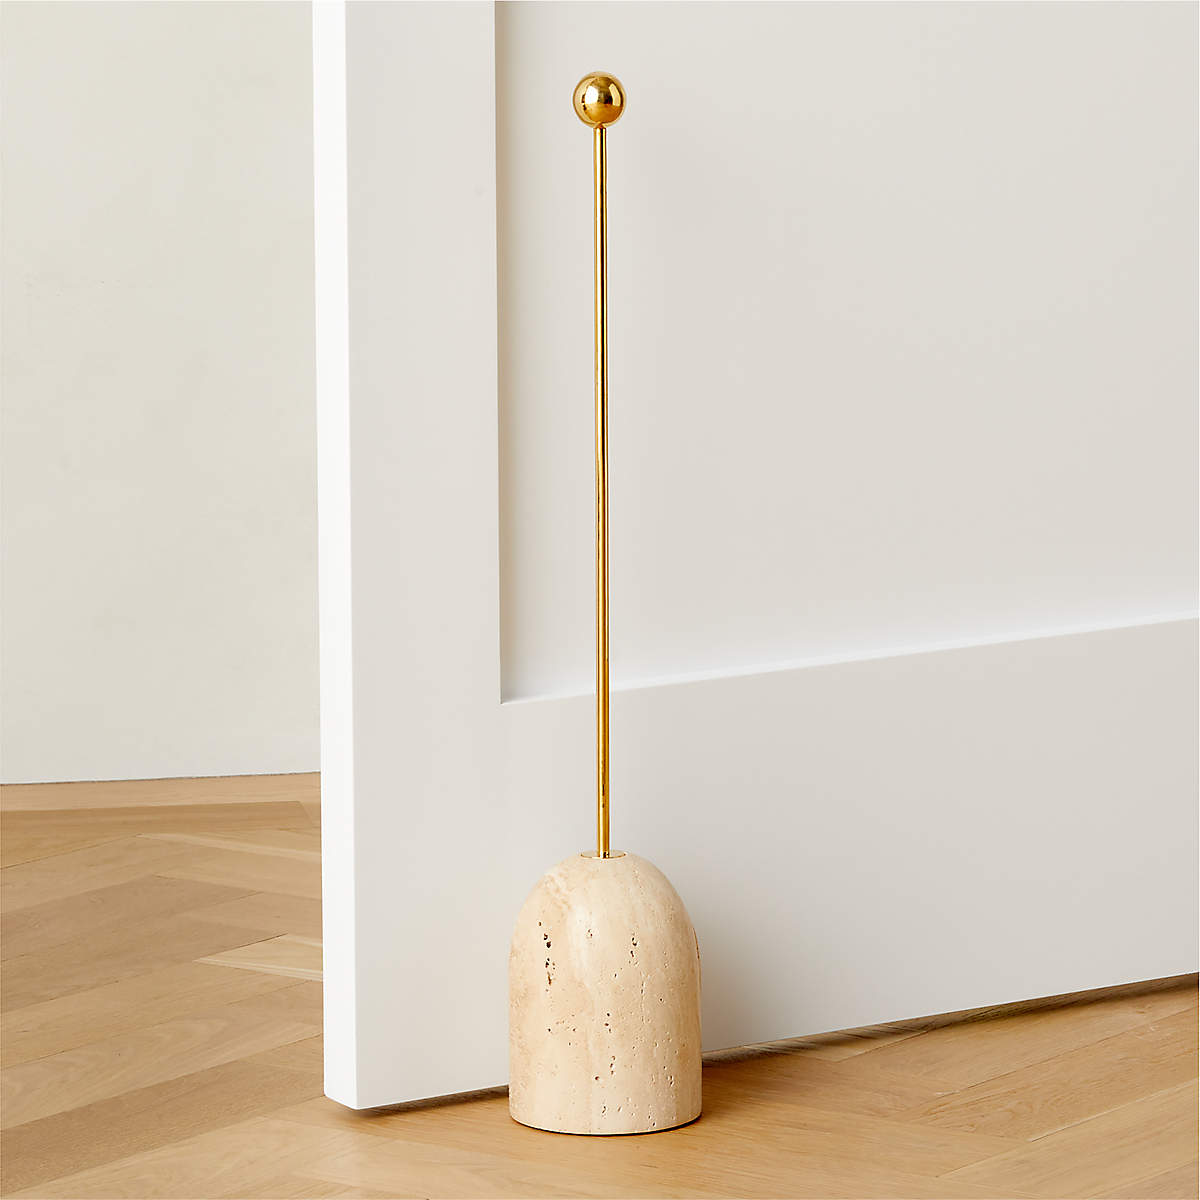 travertine-doorstop-with-unlacquered-polished-brass-handle.jpg